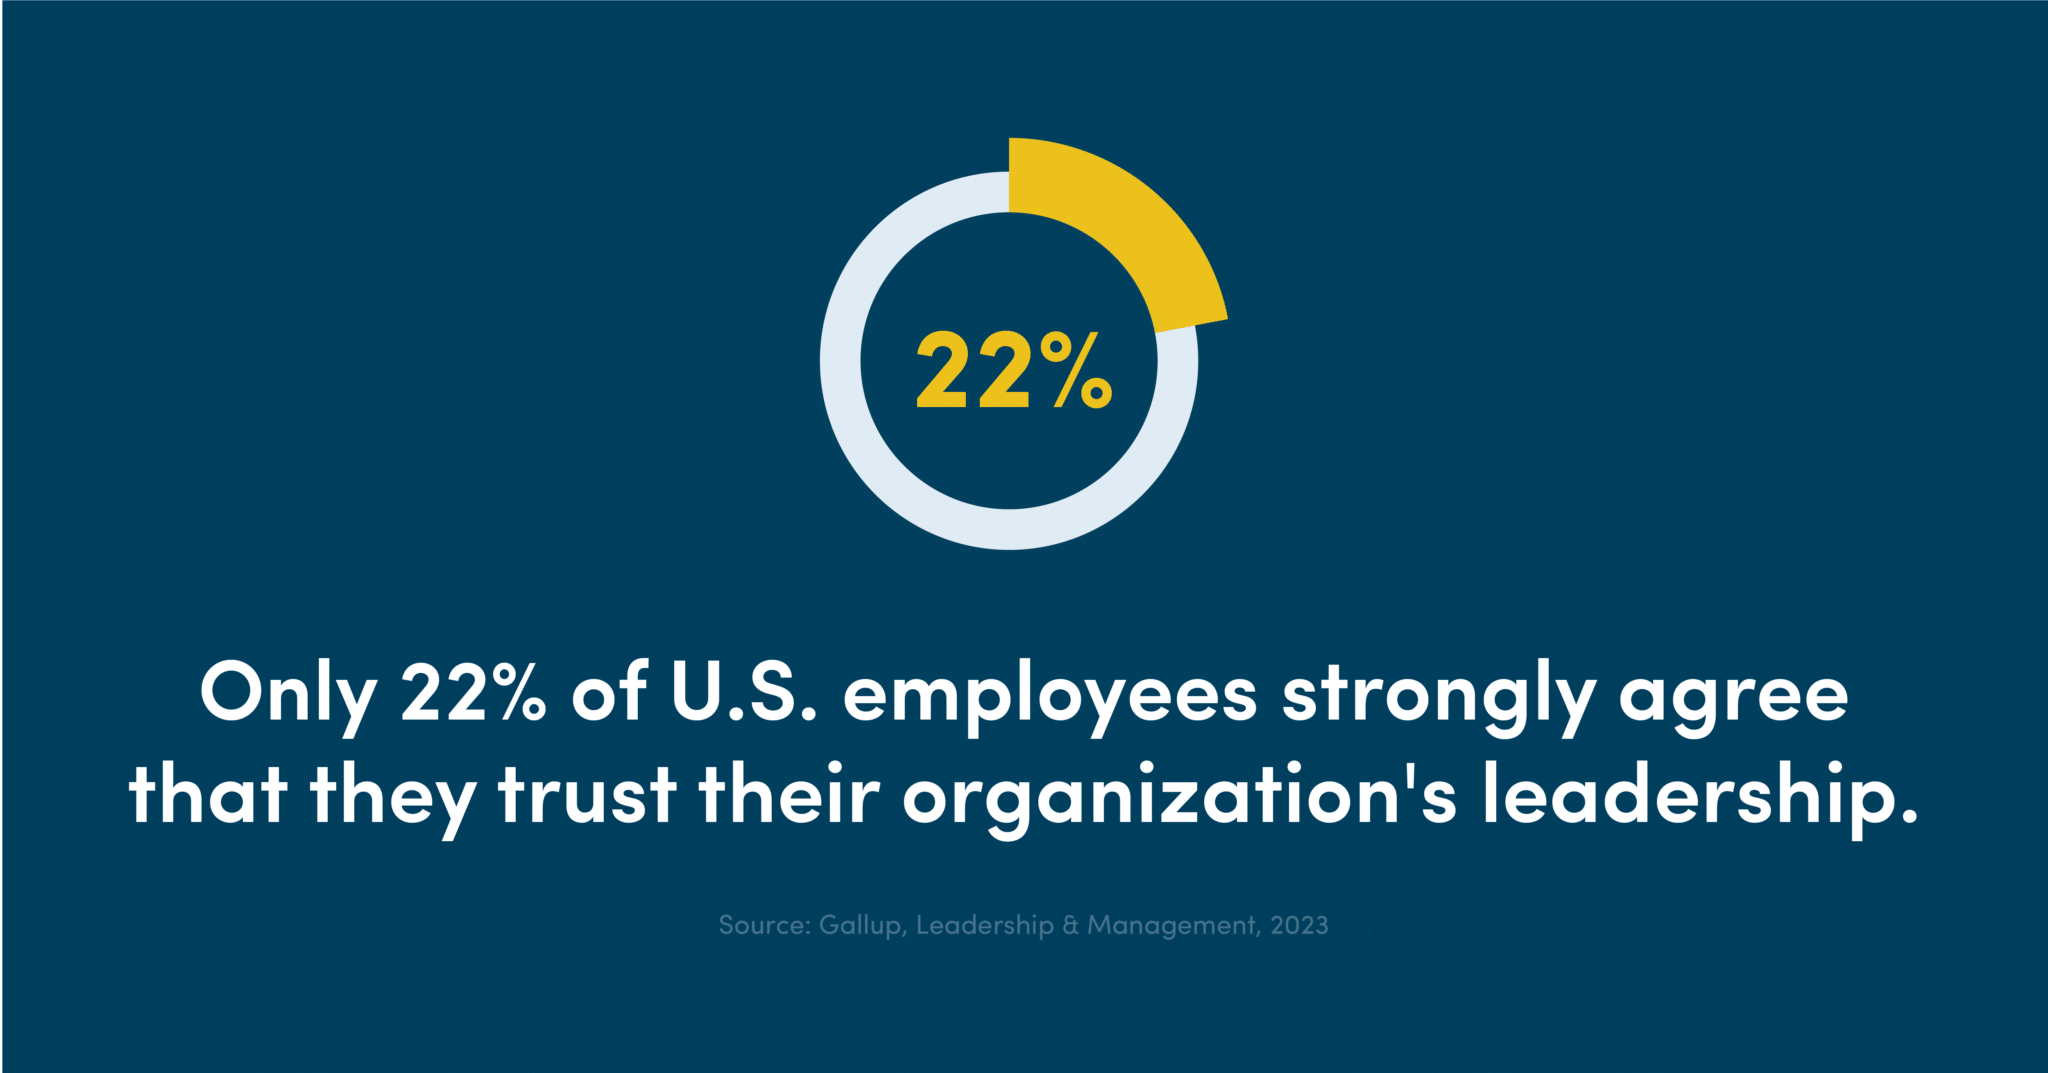 Only 22% of U.S. employees strongly agree that they trust their organization's leadership.